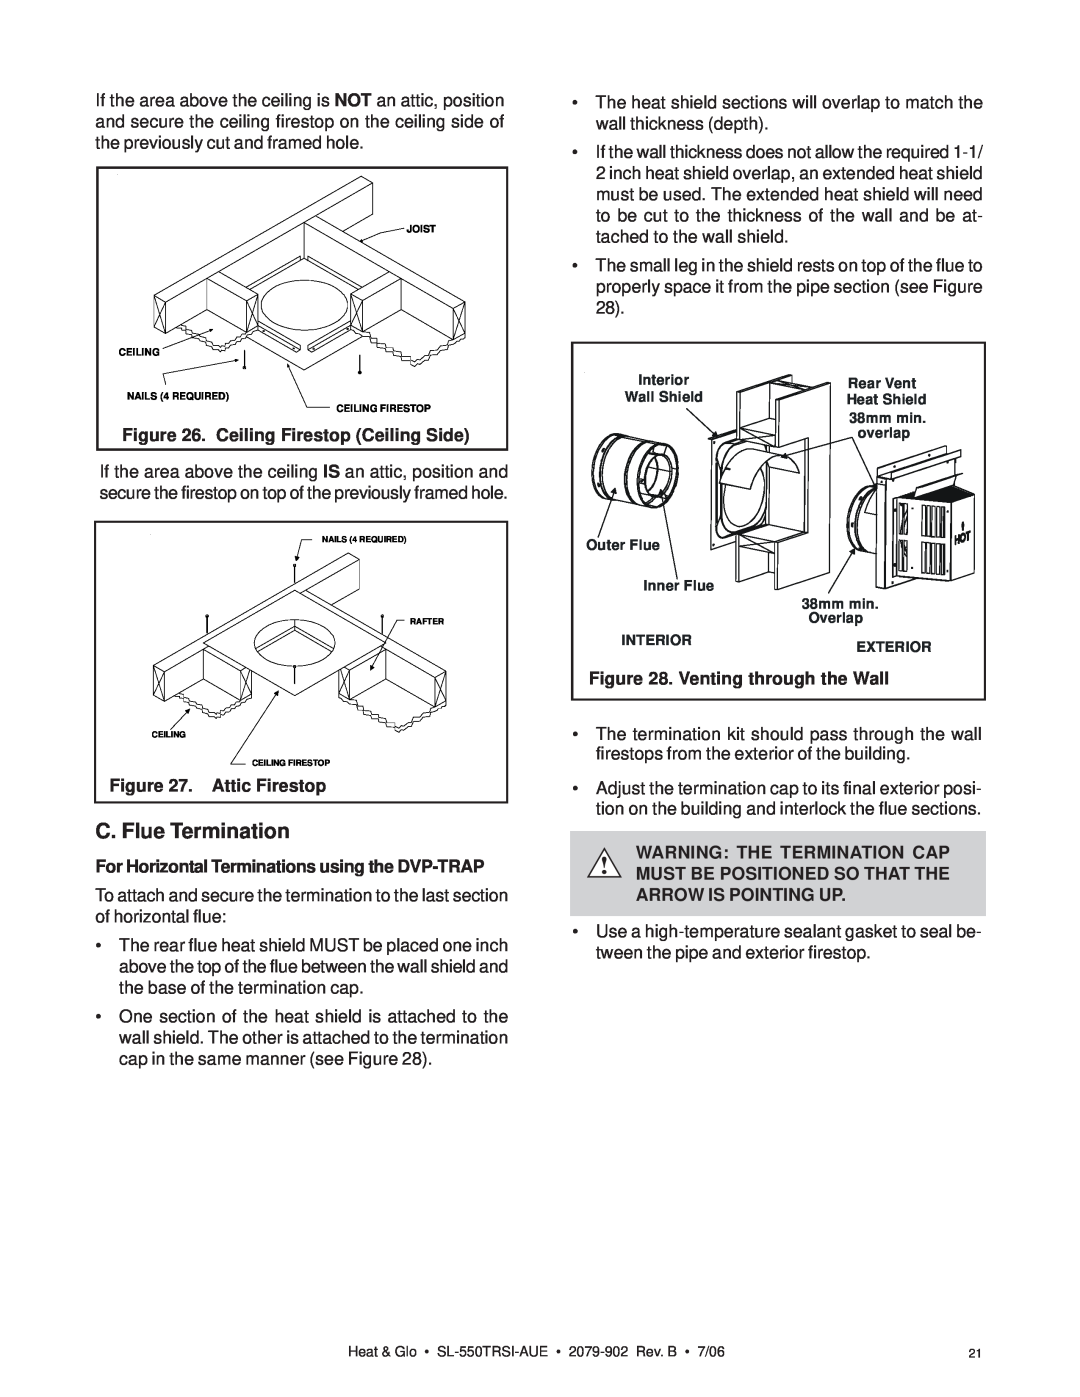 Hearth and Home Technologies SL-550TRSI-AUE manual C. Flue Termination, Ceiling Firestop Ceiling Side, Attic Firestop 